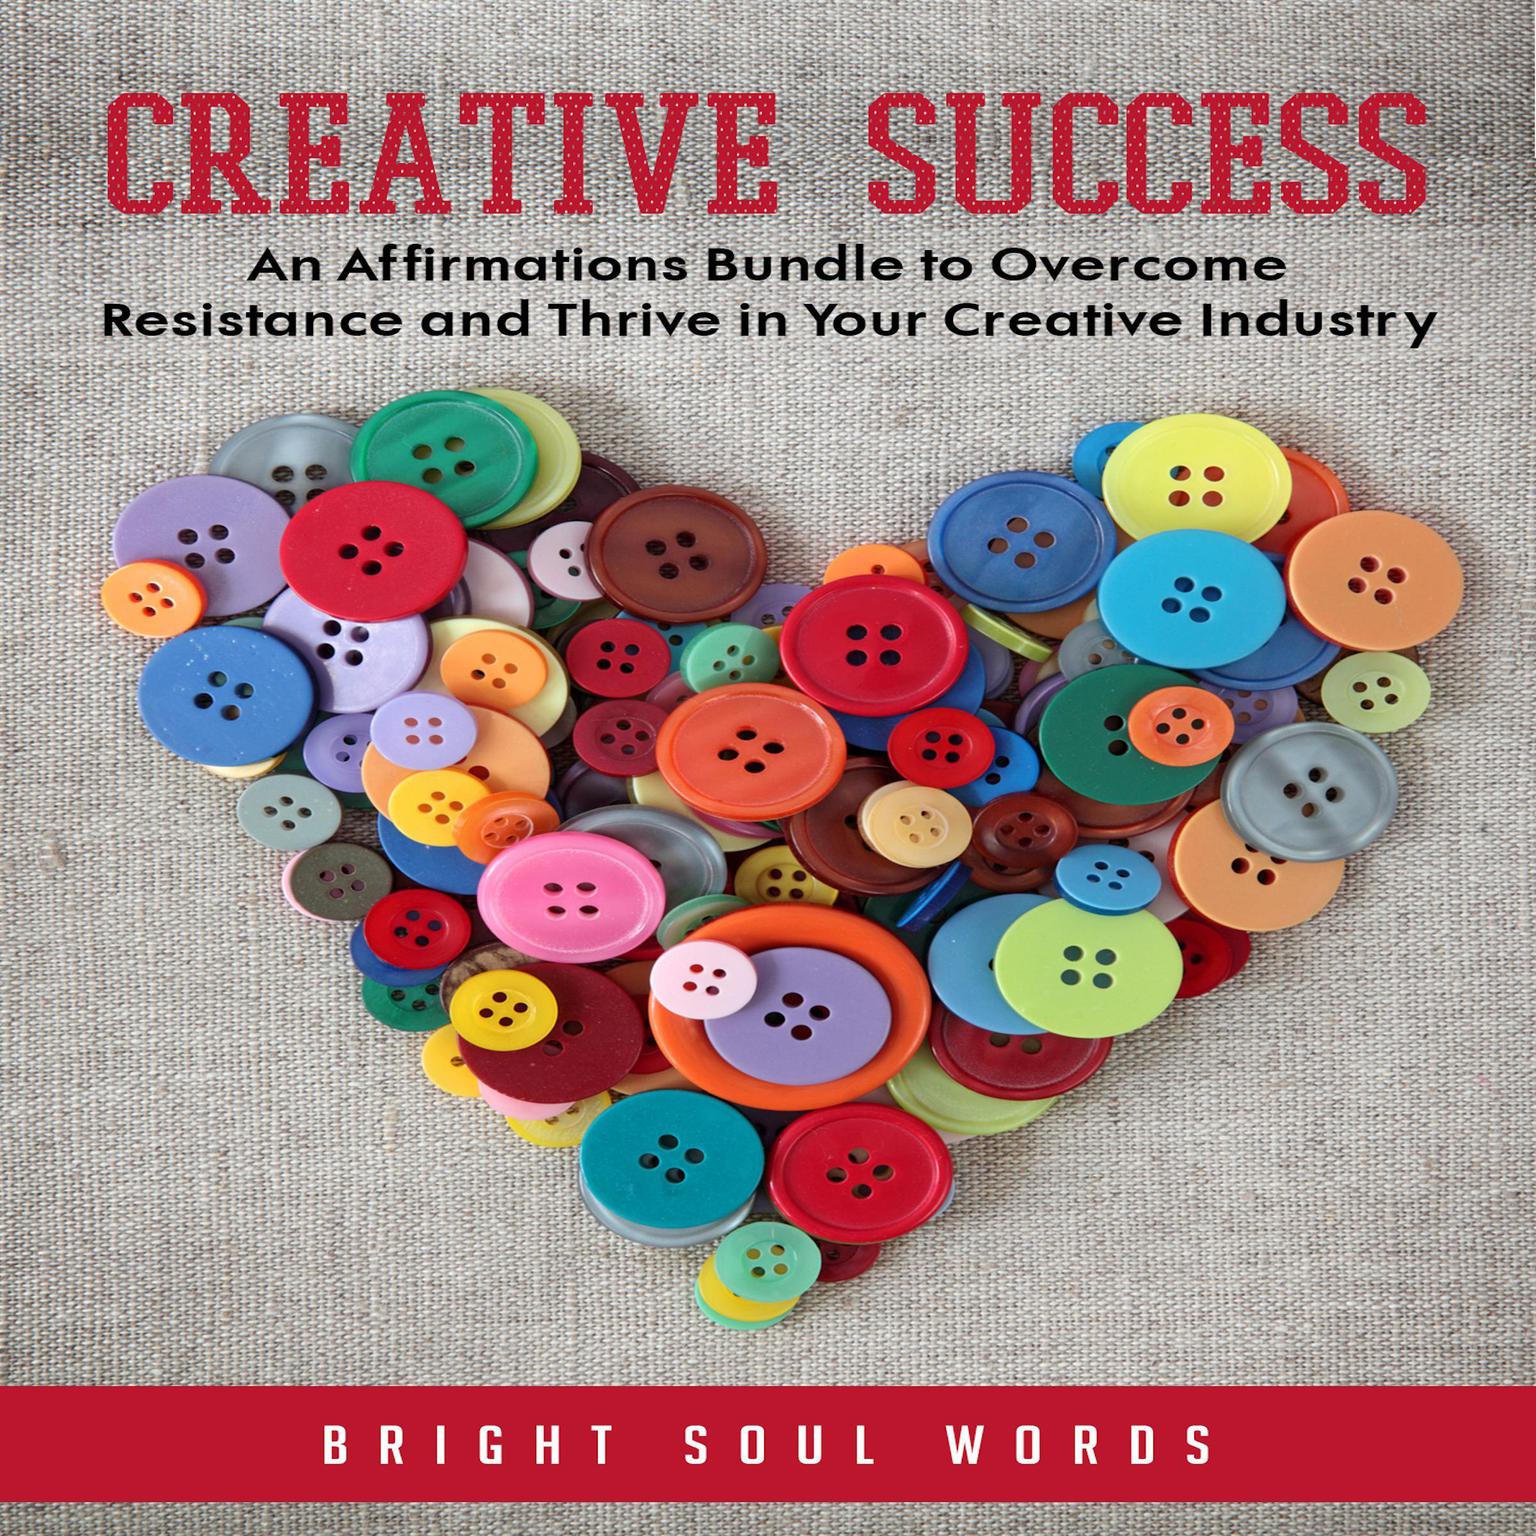 Creative Success: An Affirmations Bundle to Overcome Resistance and Thrive in Your Creative Industry Audiobook, by Bright Soul Words